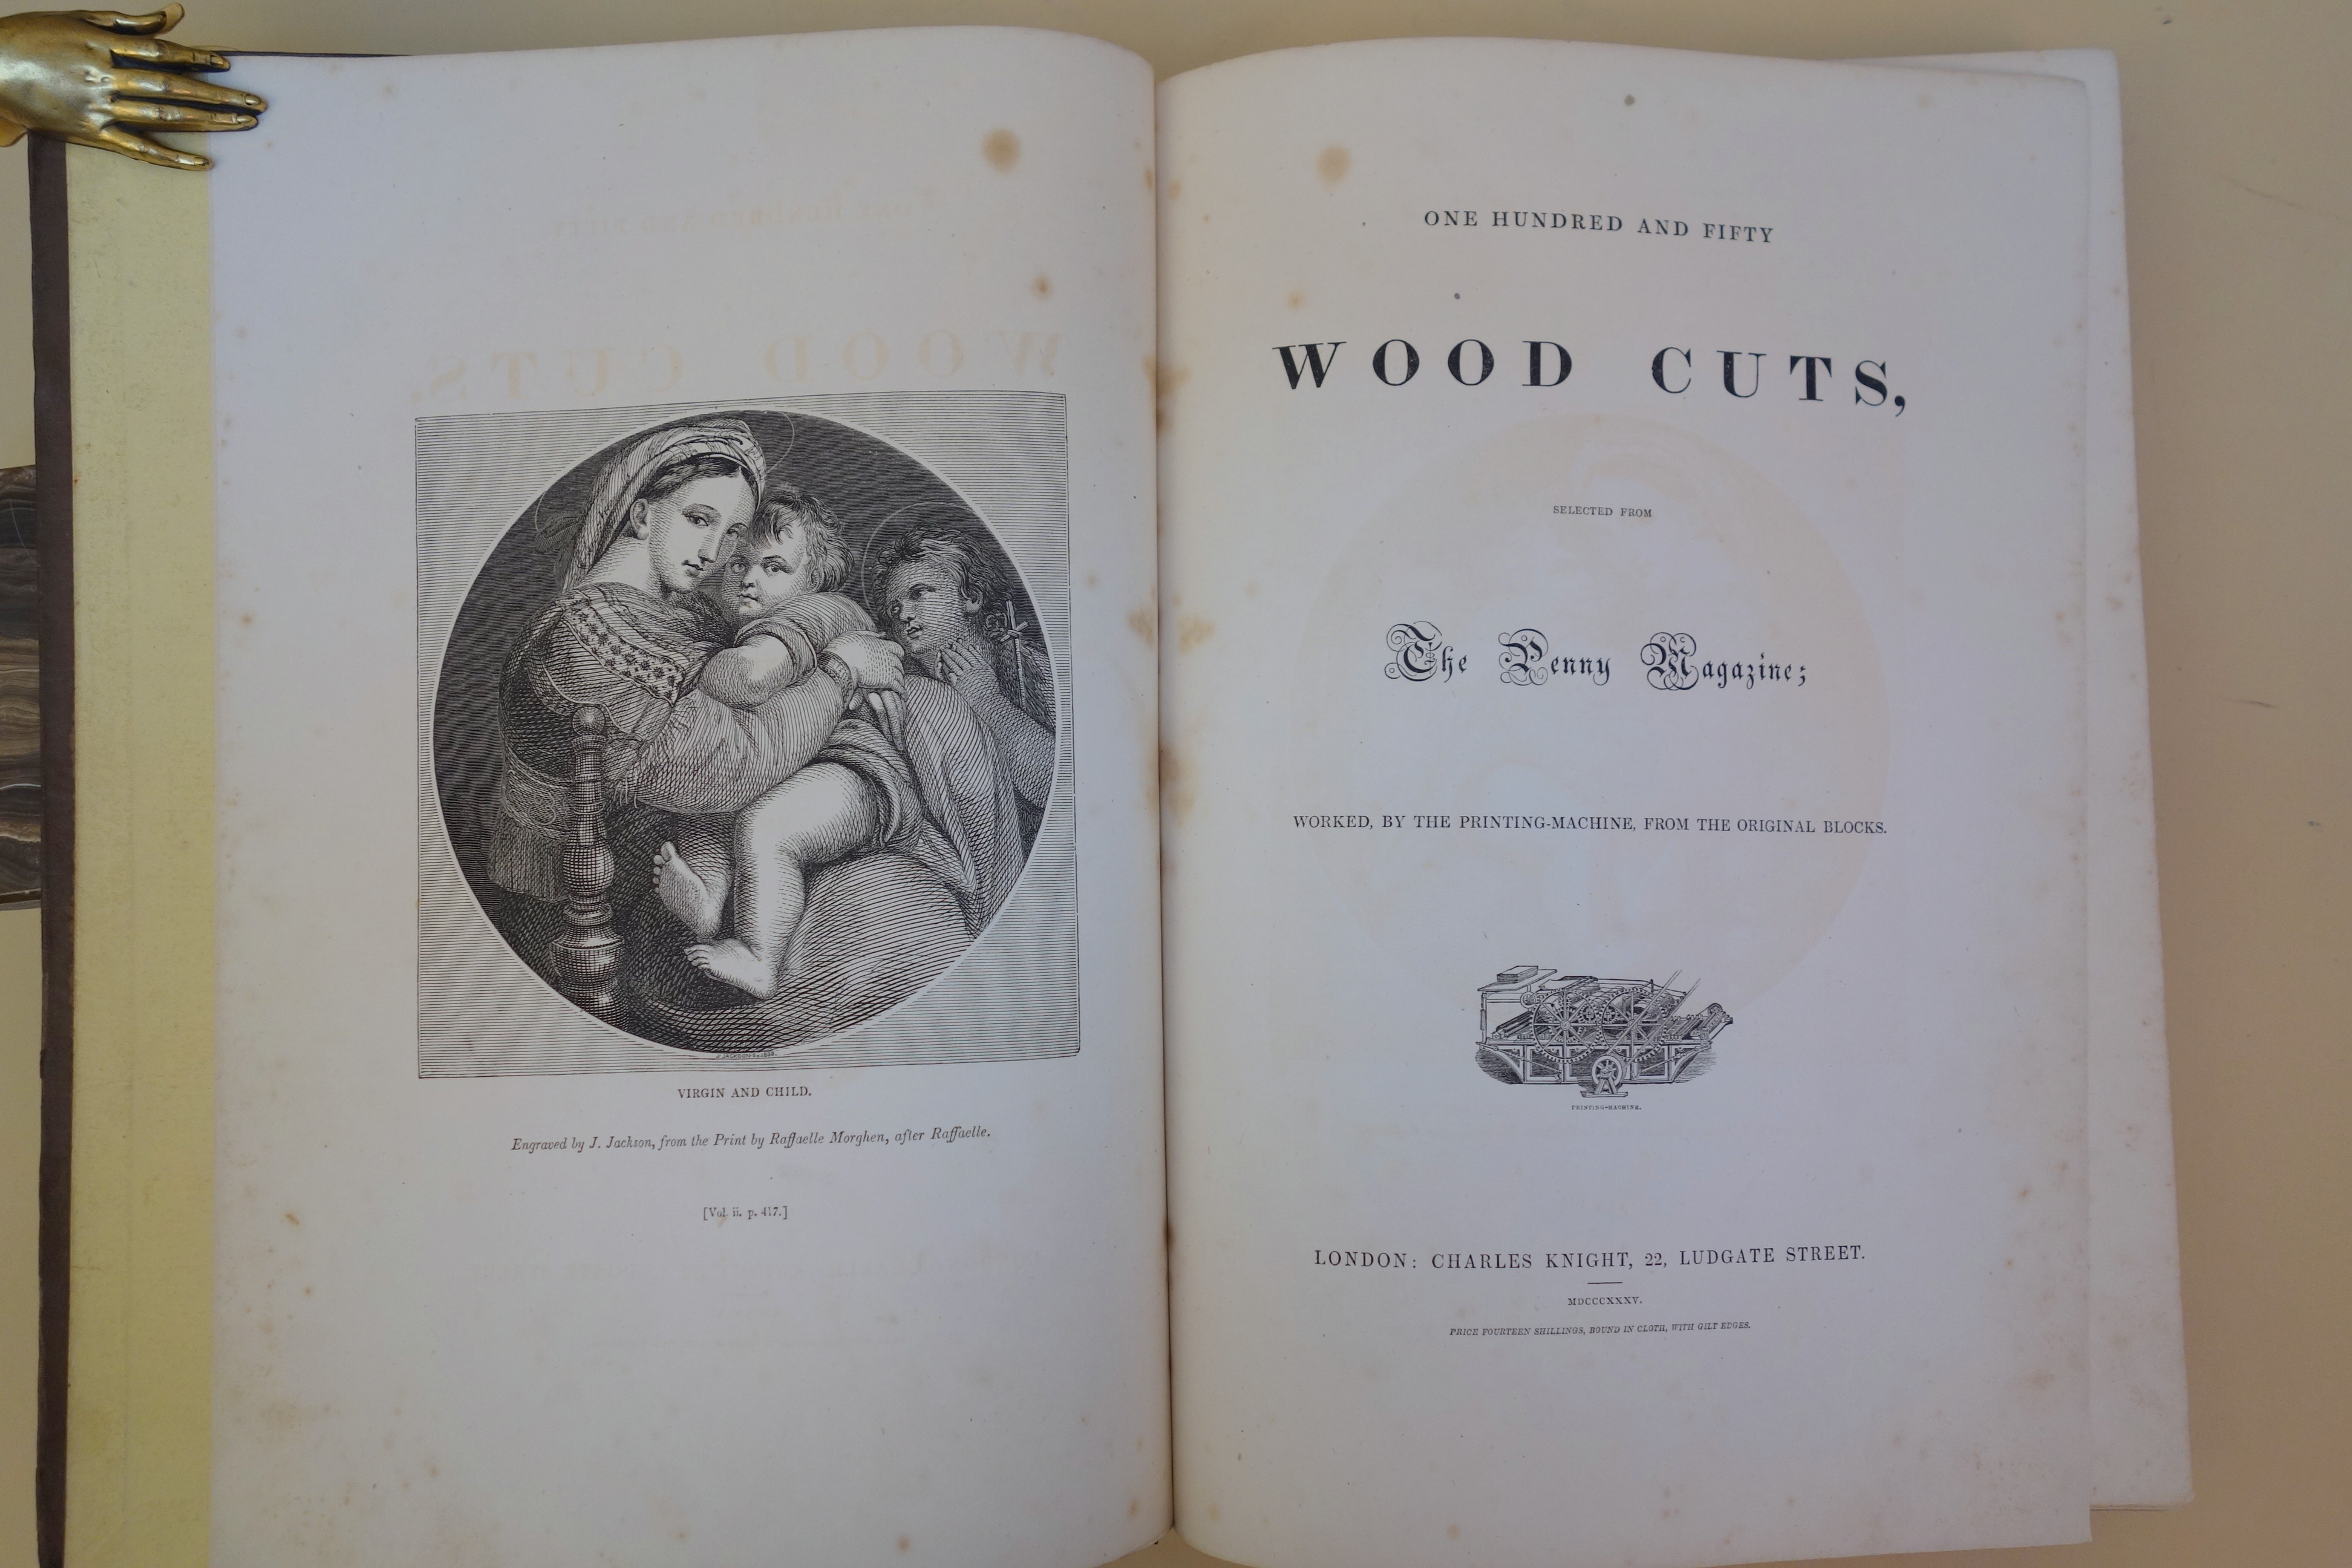 One Hundred and Fifty Wood Cuts title page